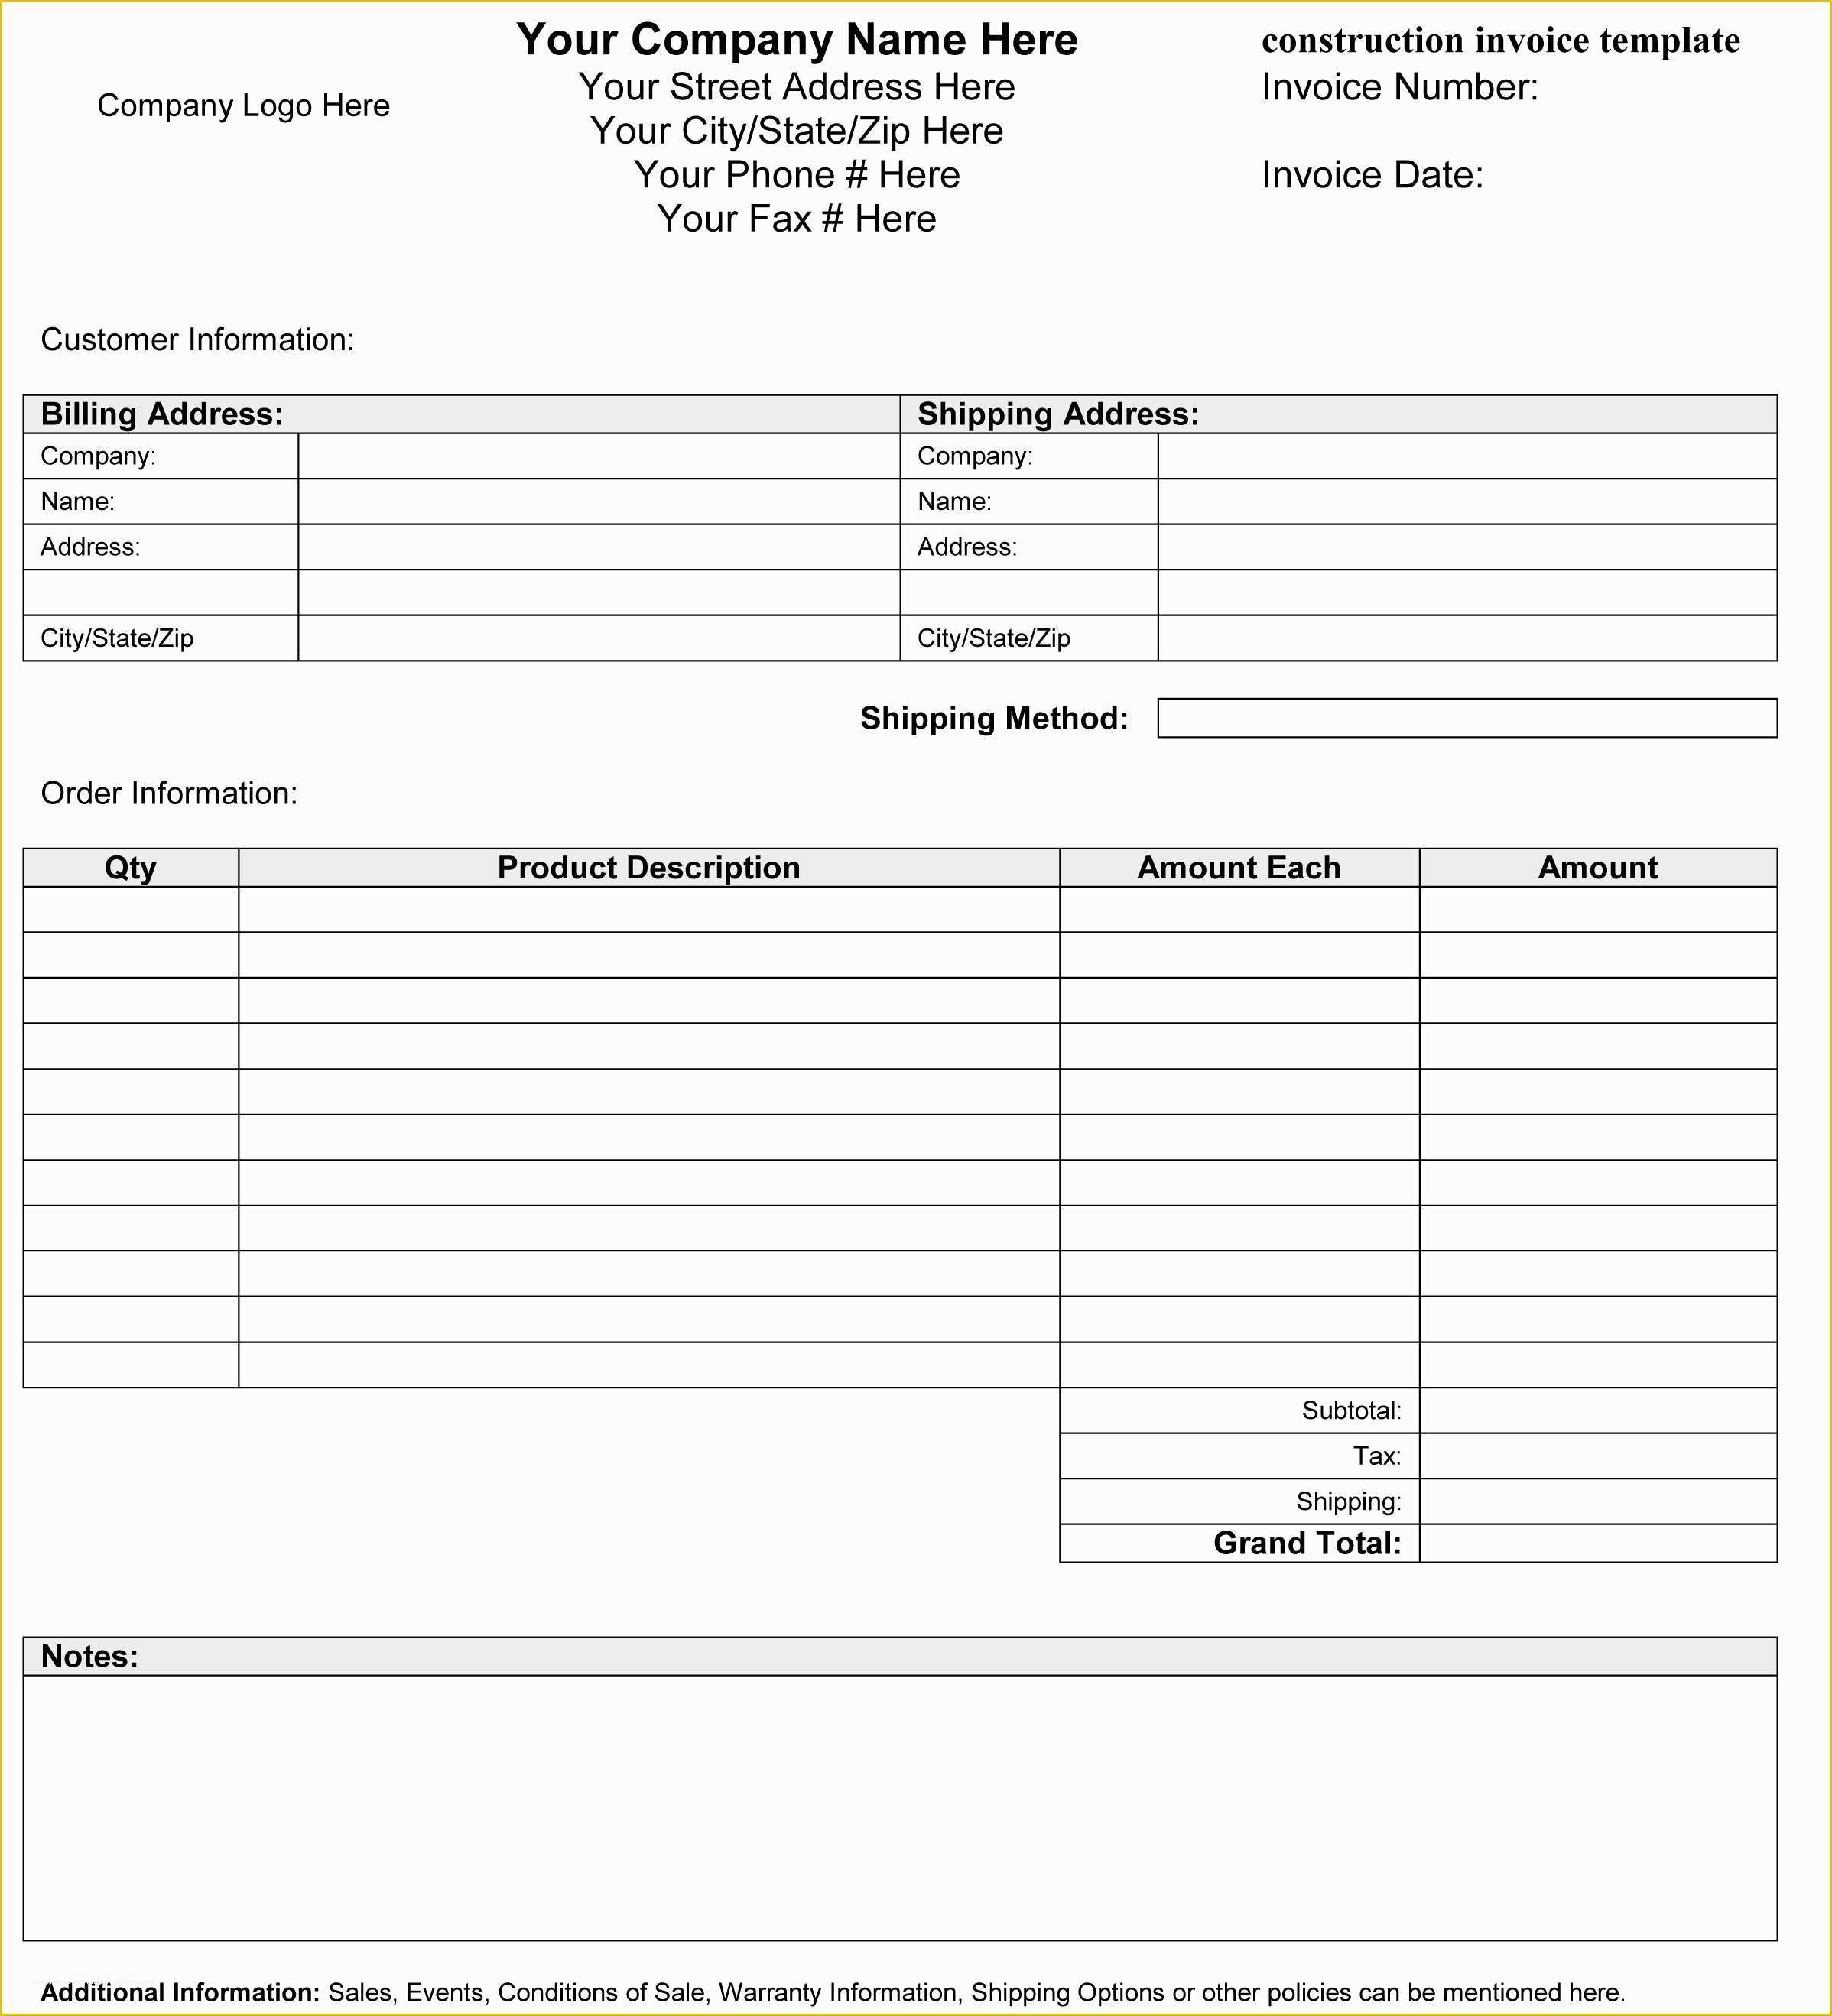 Independent Contractor Invoice Template Free Of Construction Invoice Template